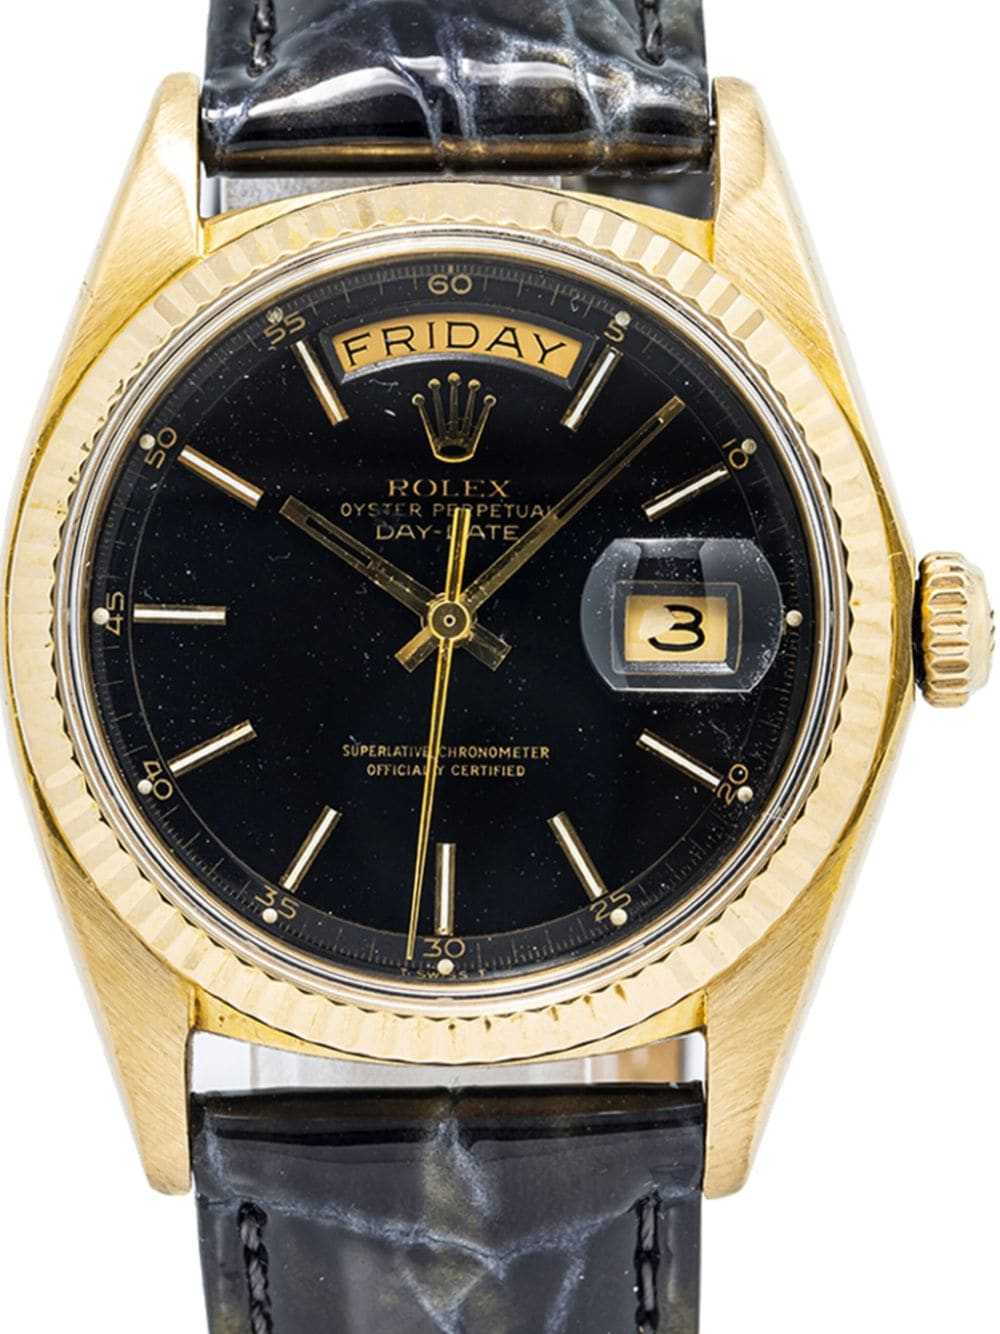 Rolex pre-owned Day-Date 36mm - Black - image 2